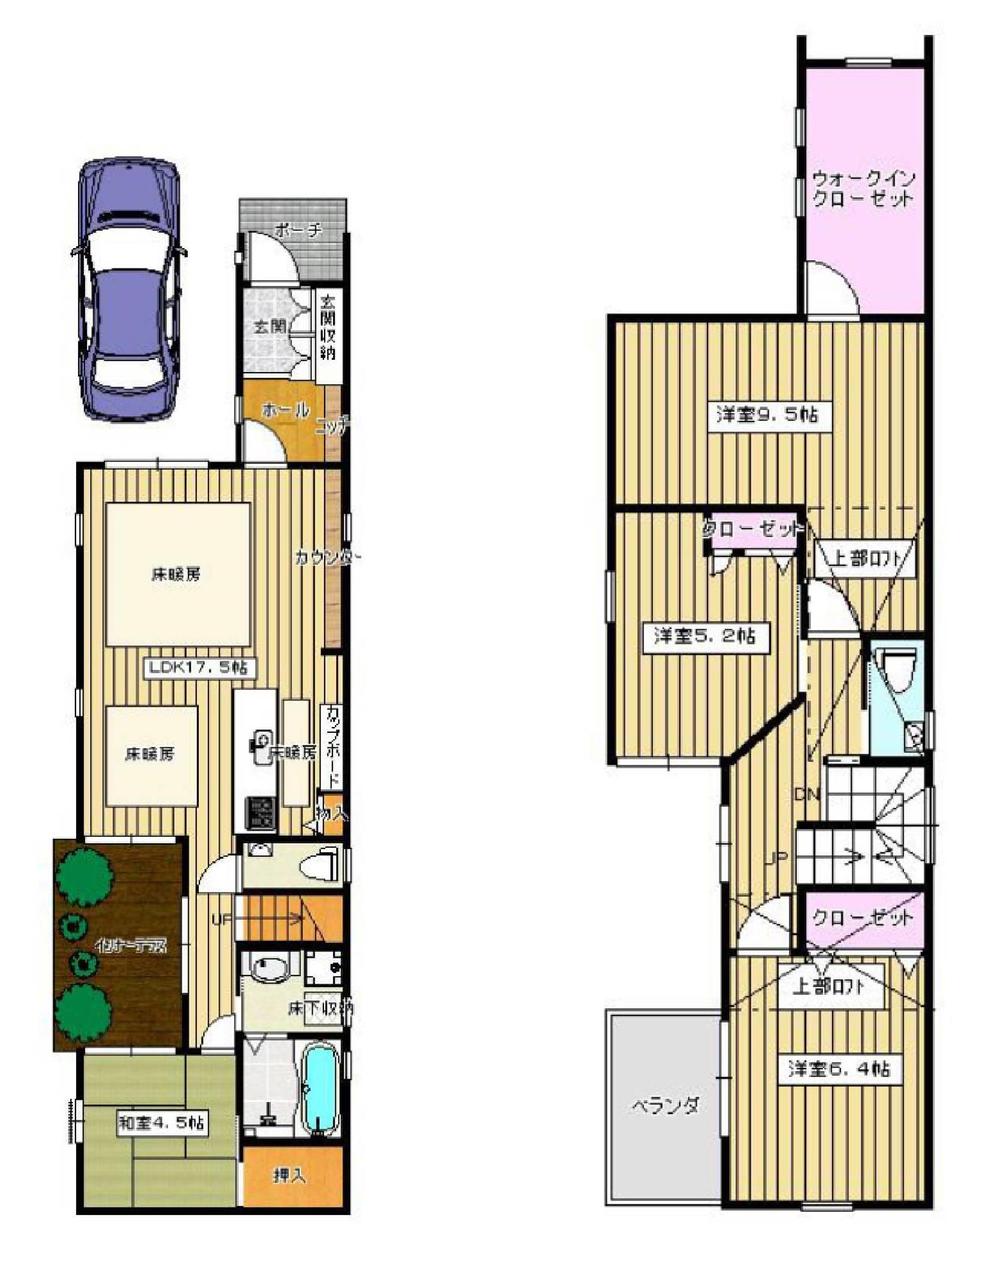 Floor plan. 46,800,000 yen, 4LDK, Land area 107.16 sq m , Building area 116.07 sq m   ◆ A No. plan ◆  Course is comfortable plan that I thought the person who populated storage! Loft in stairwell, The living room is a counter and attractions packed! 